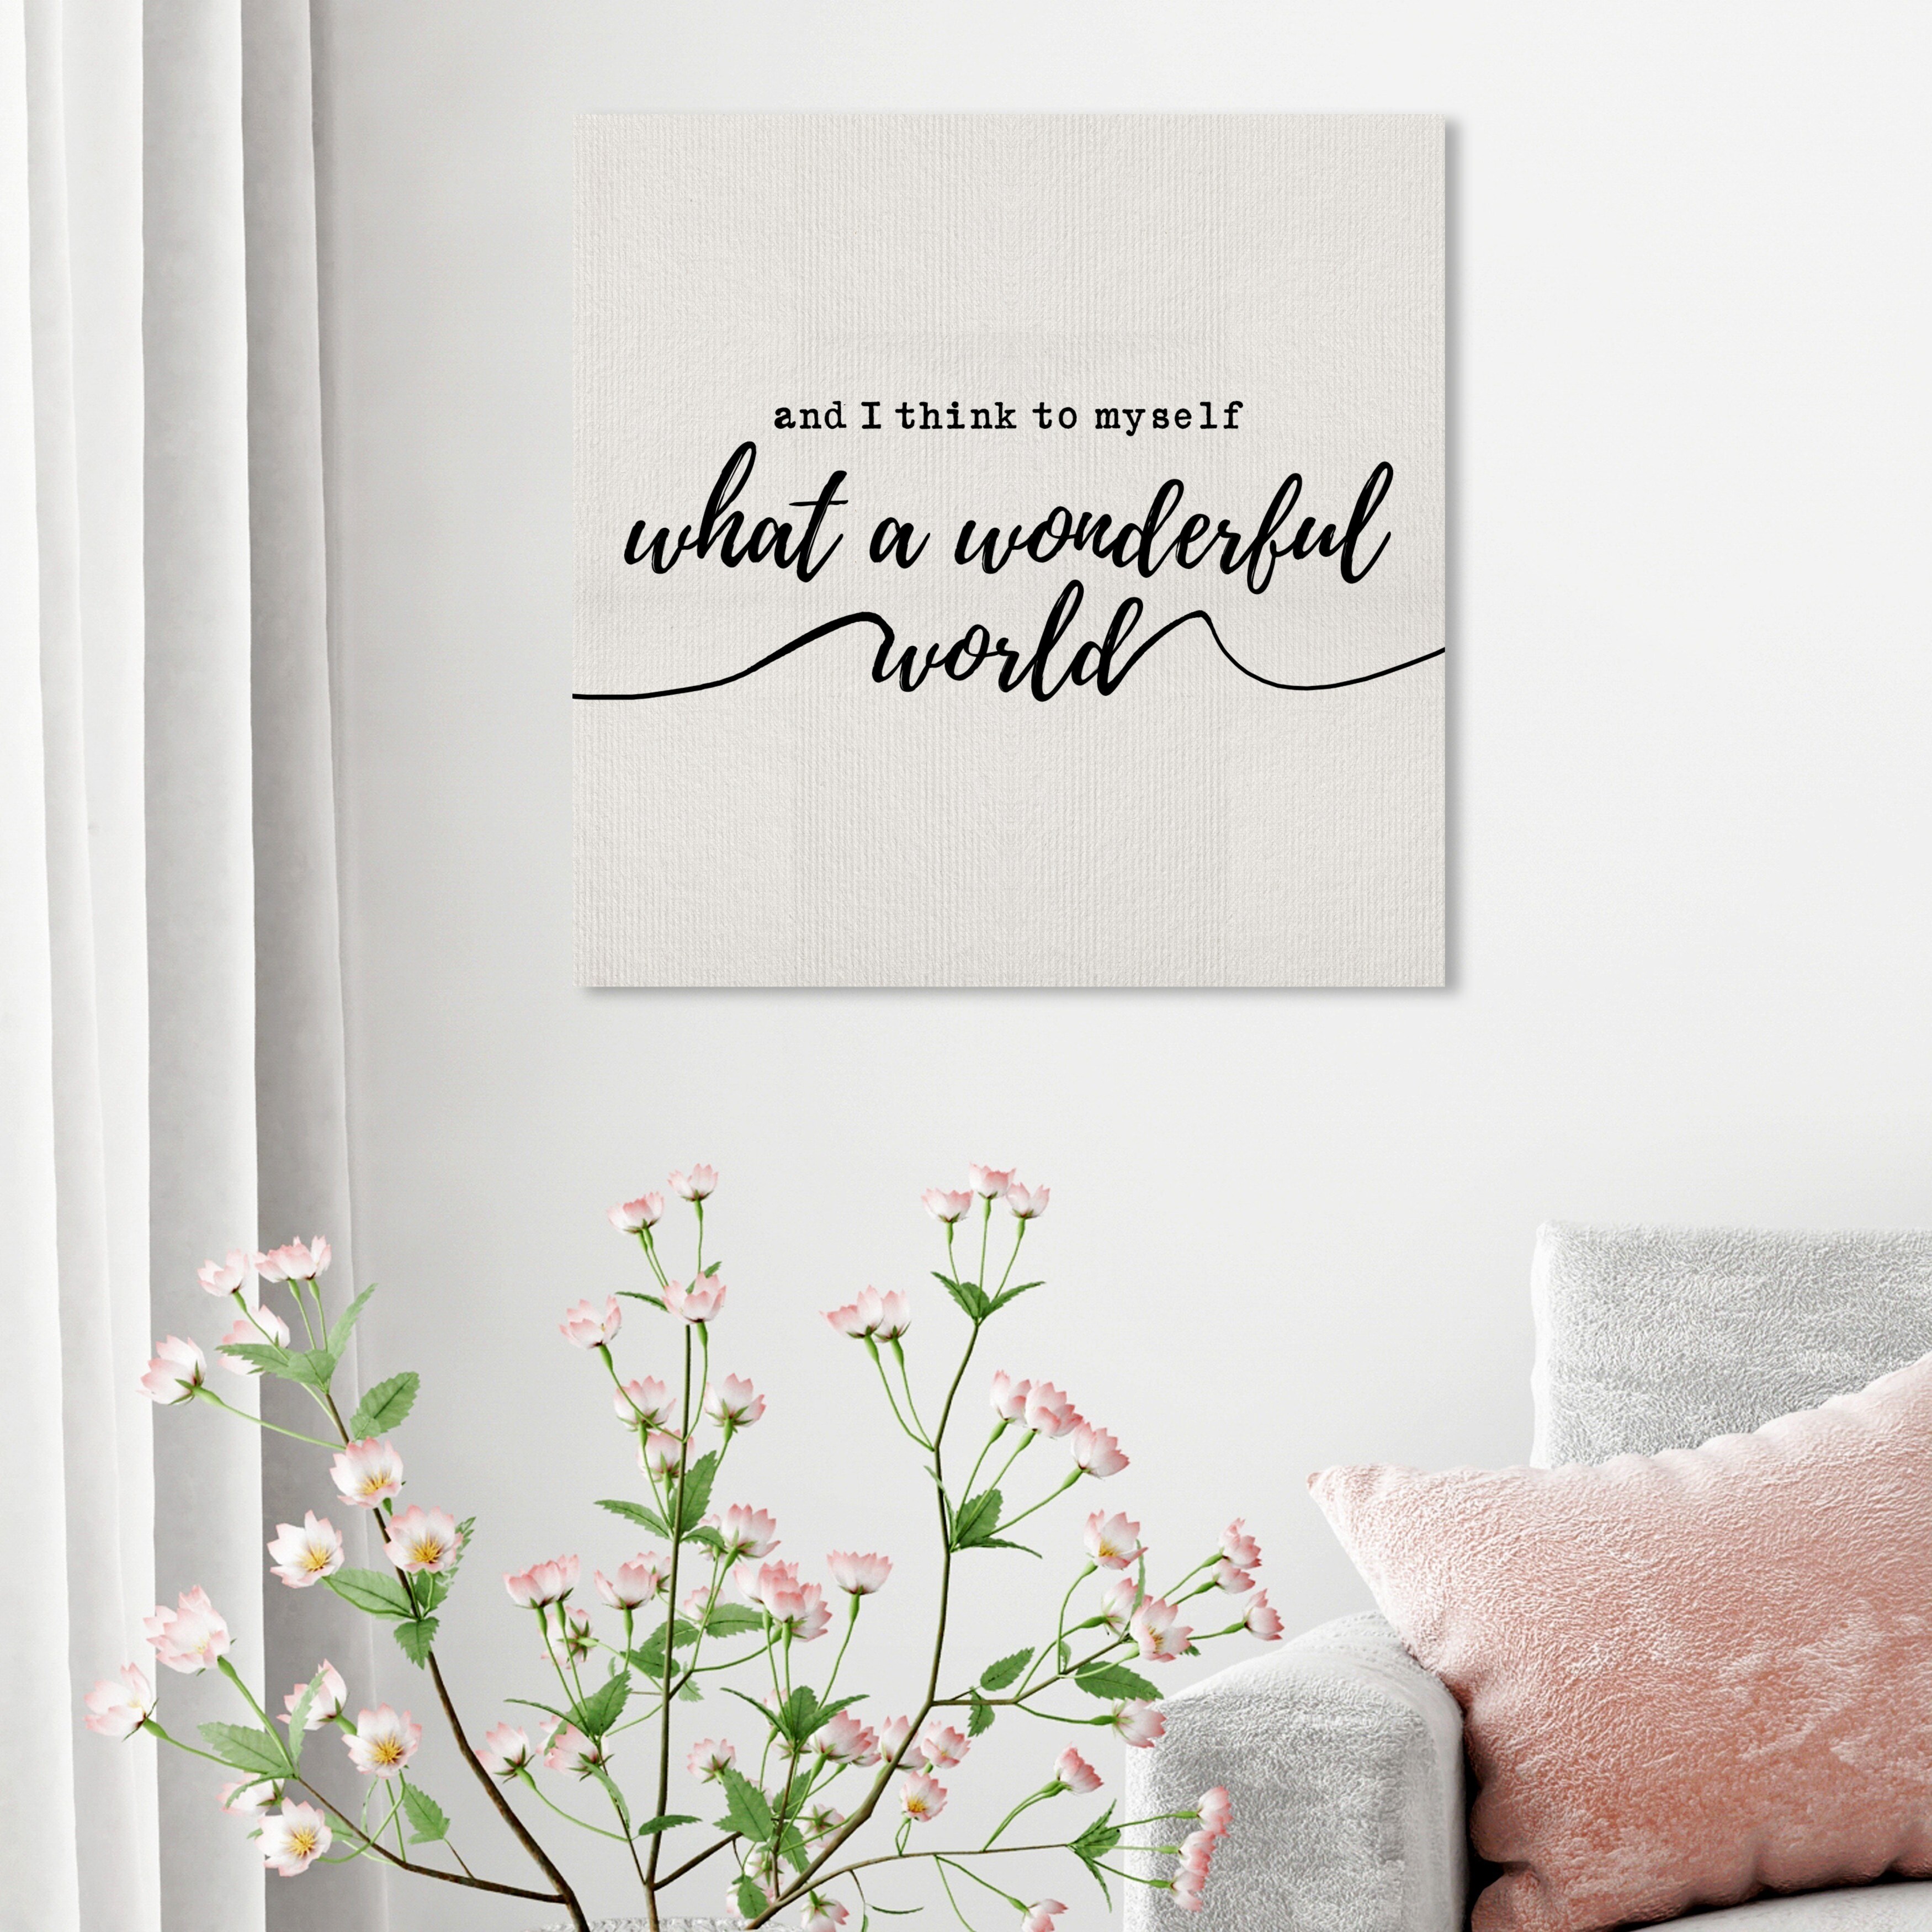 Oliver Gal 'Just The Two of Us Rustic' Typography and Quotes Wall Art  Canvas Print - Black, White - Bed Bath & Beyond - 28633747